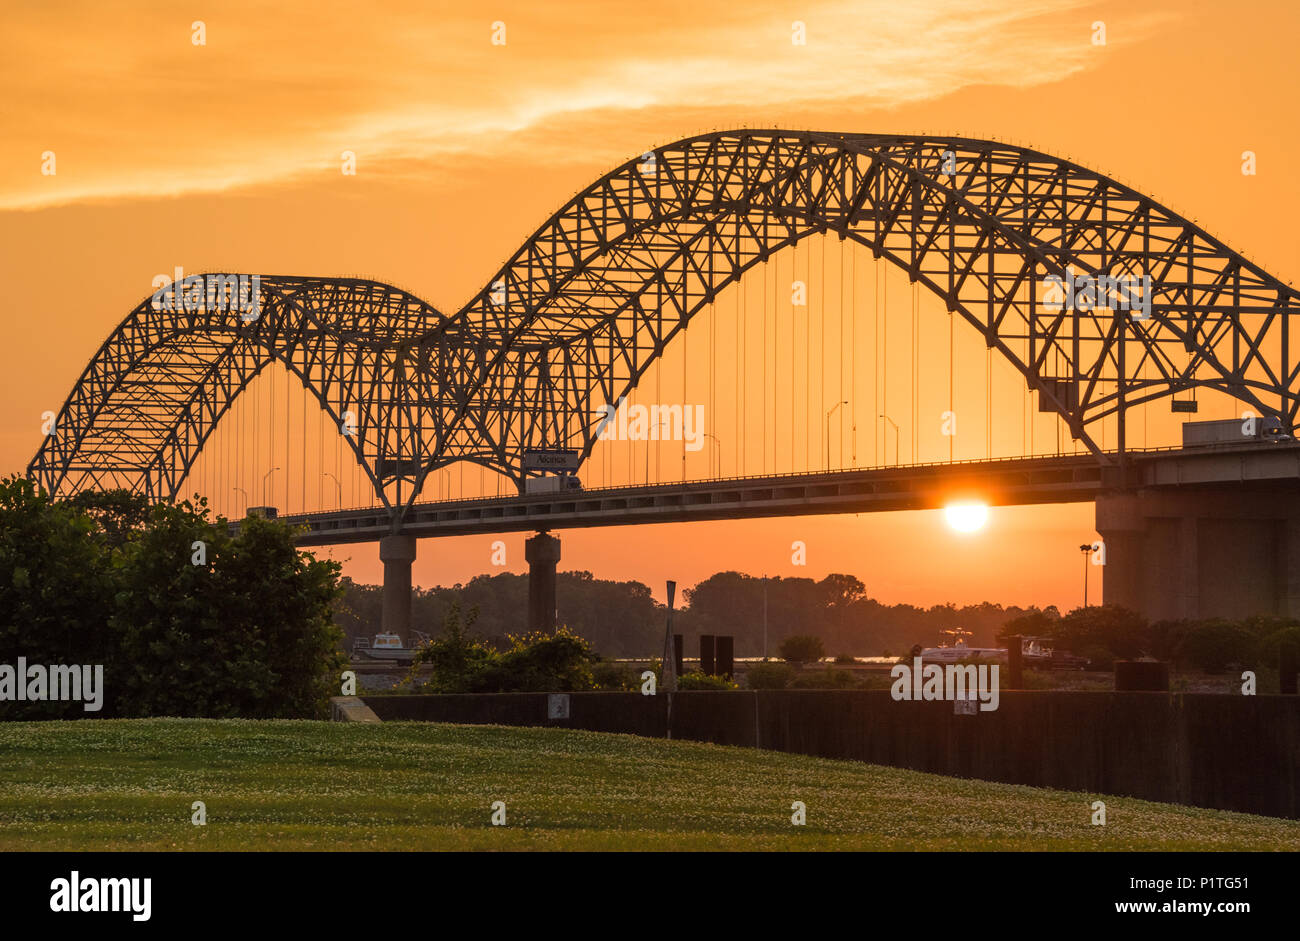 Hernando de Soto Bridge, a double-arch bridge spanning the Mississippi River between Memphis, TN and West Memphis, AR, at sunset. (USA) Stock Photo